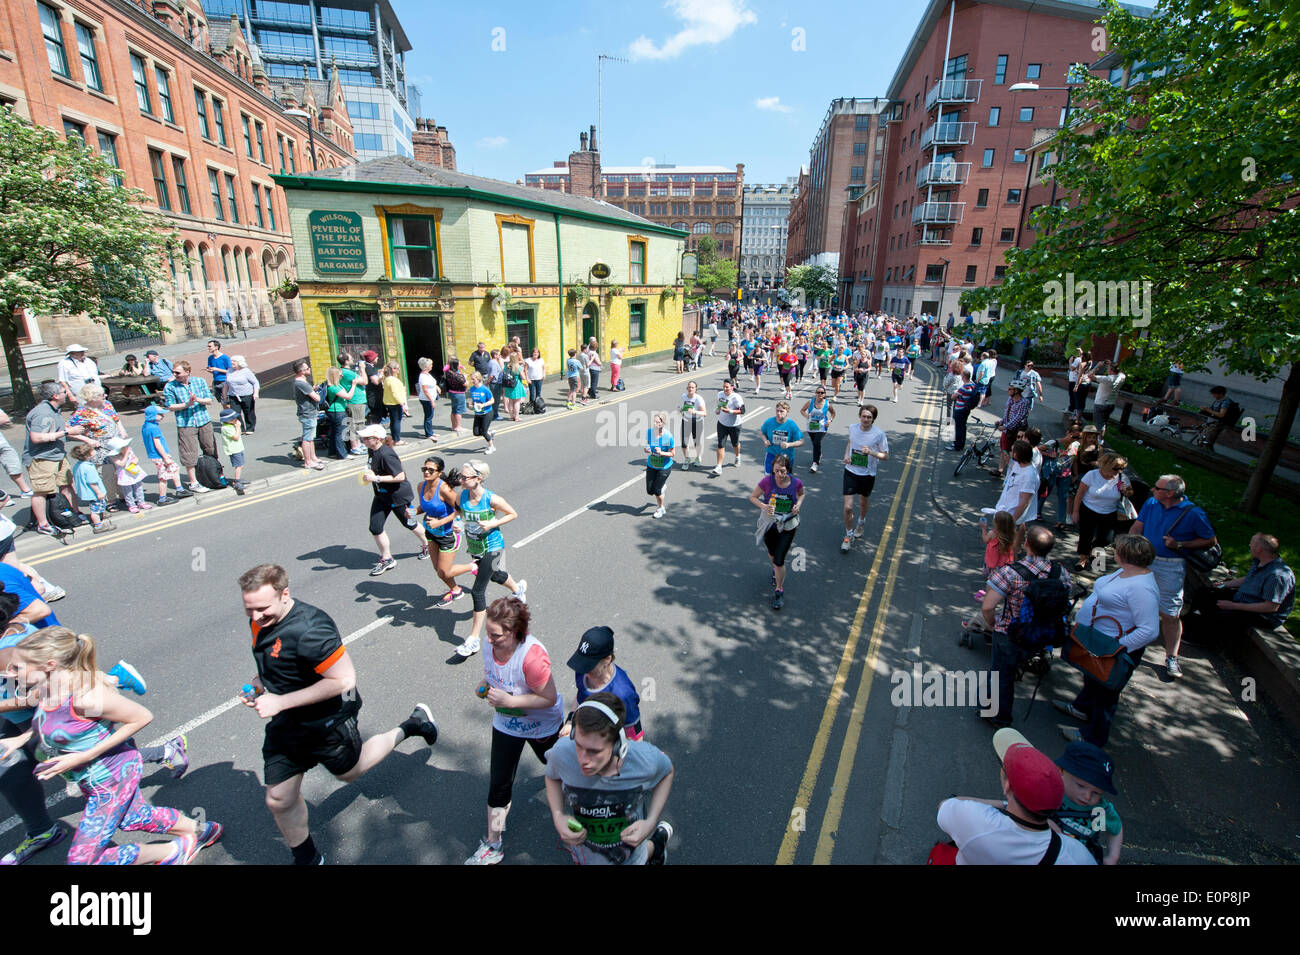 MANCHESTER, UK. 18th May 2014. Thousands of competitors take part in the 2014 Bupa Great Manchester Run, which is both an elite and mass participation event. Now in it's 12th year, it is Europe's biggest 10k running event. Credit:  Russell Hart/Alamy Live News. Stock Photo